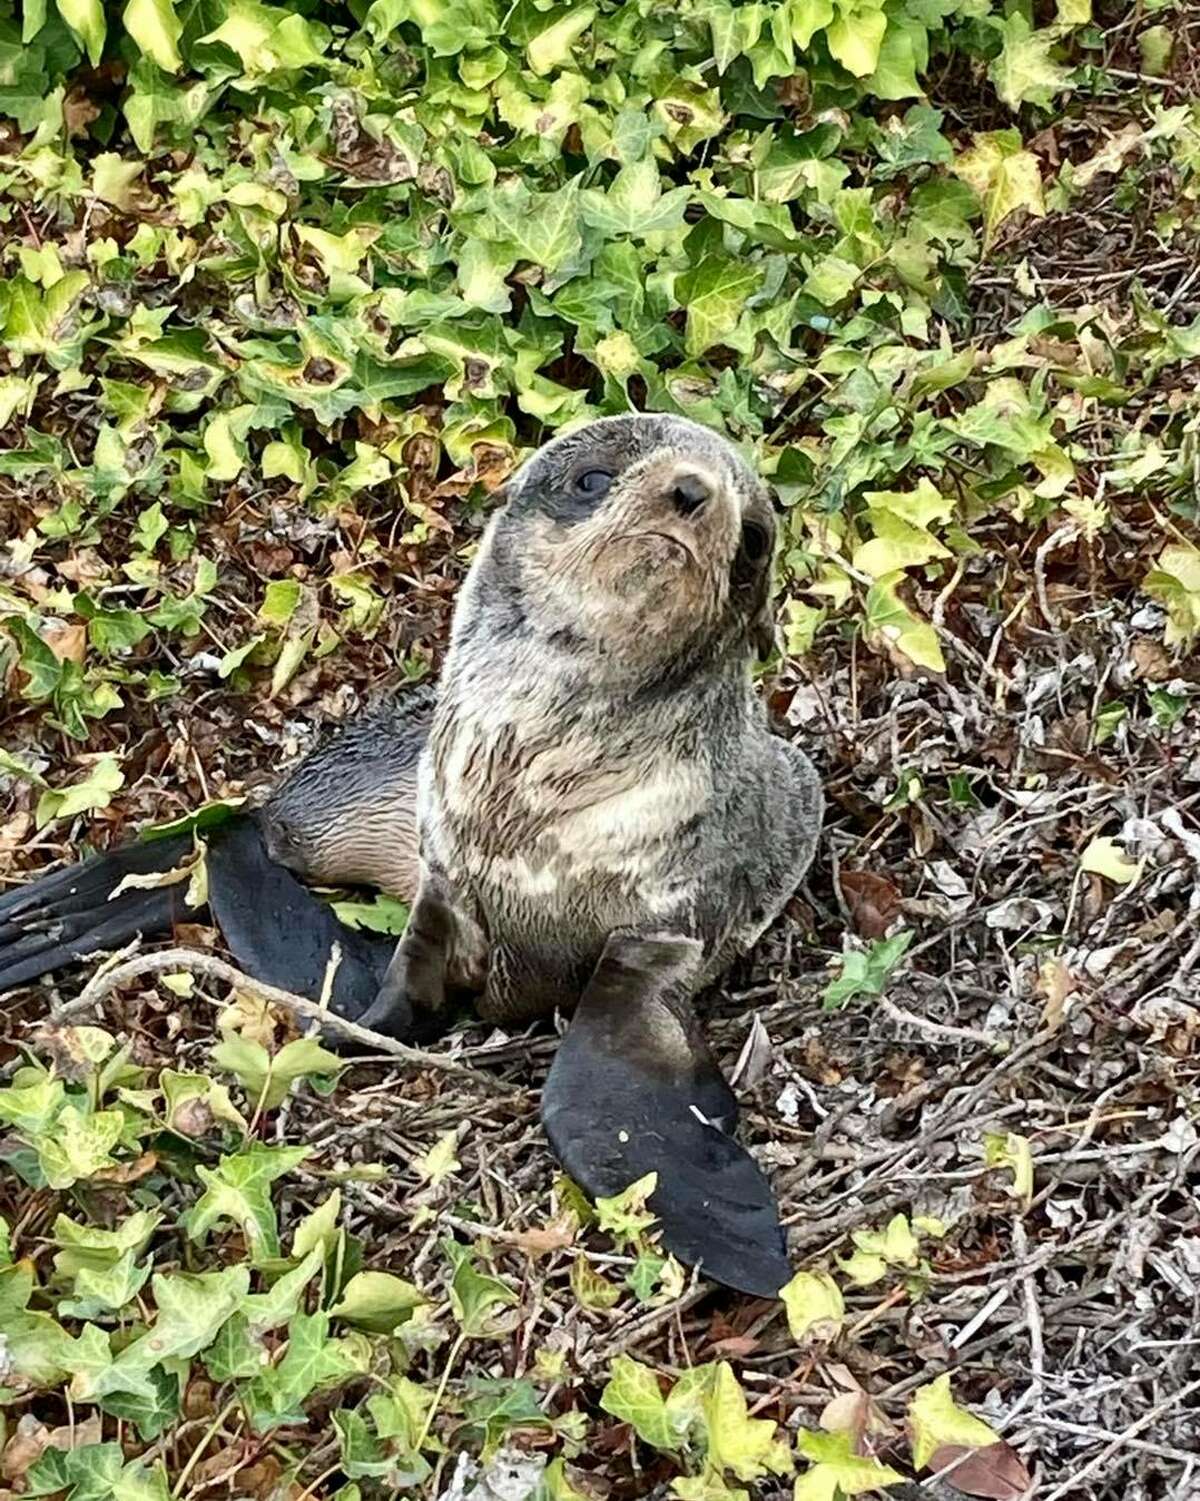 A northern fur seal pup was rescued from the streets on San Rafael, Calif., on Oct. 30, 2021.